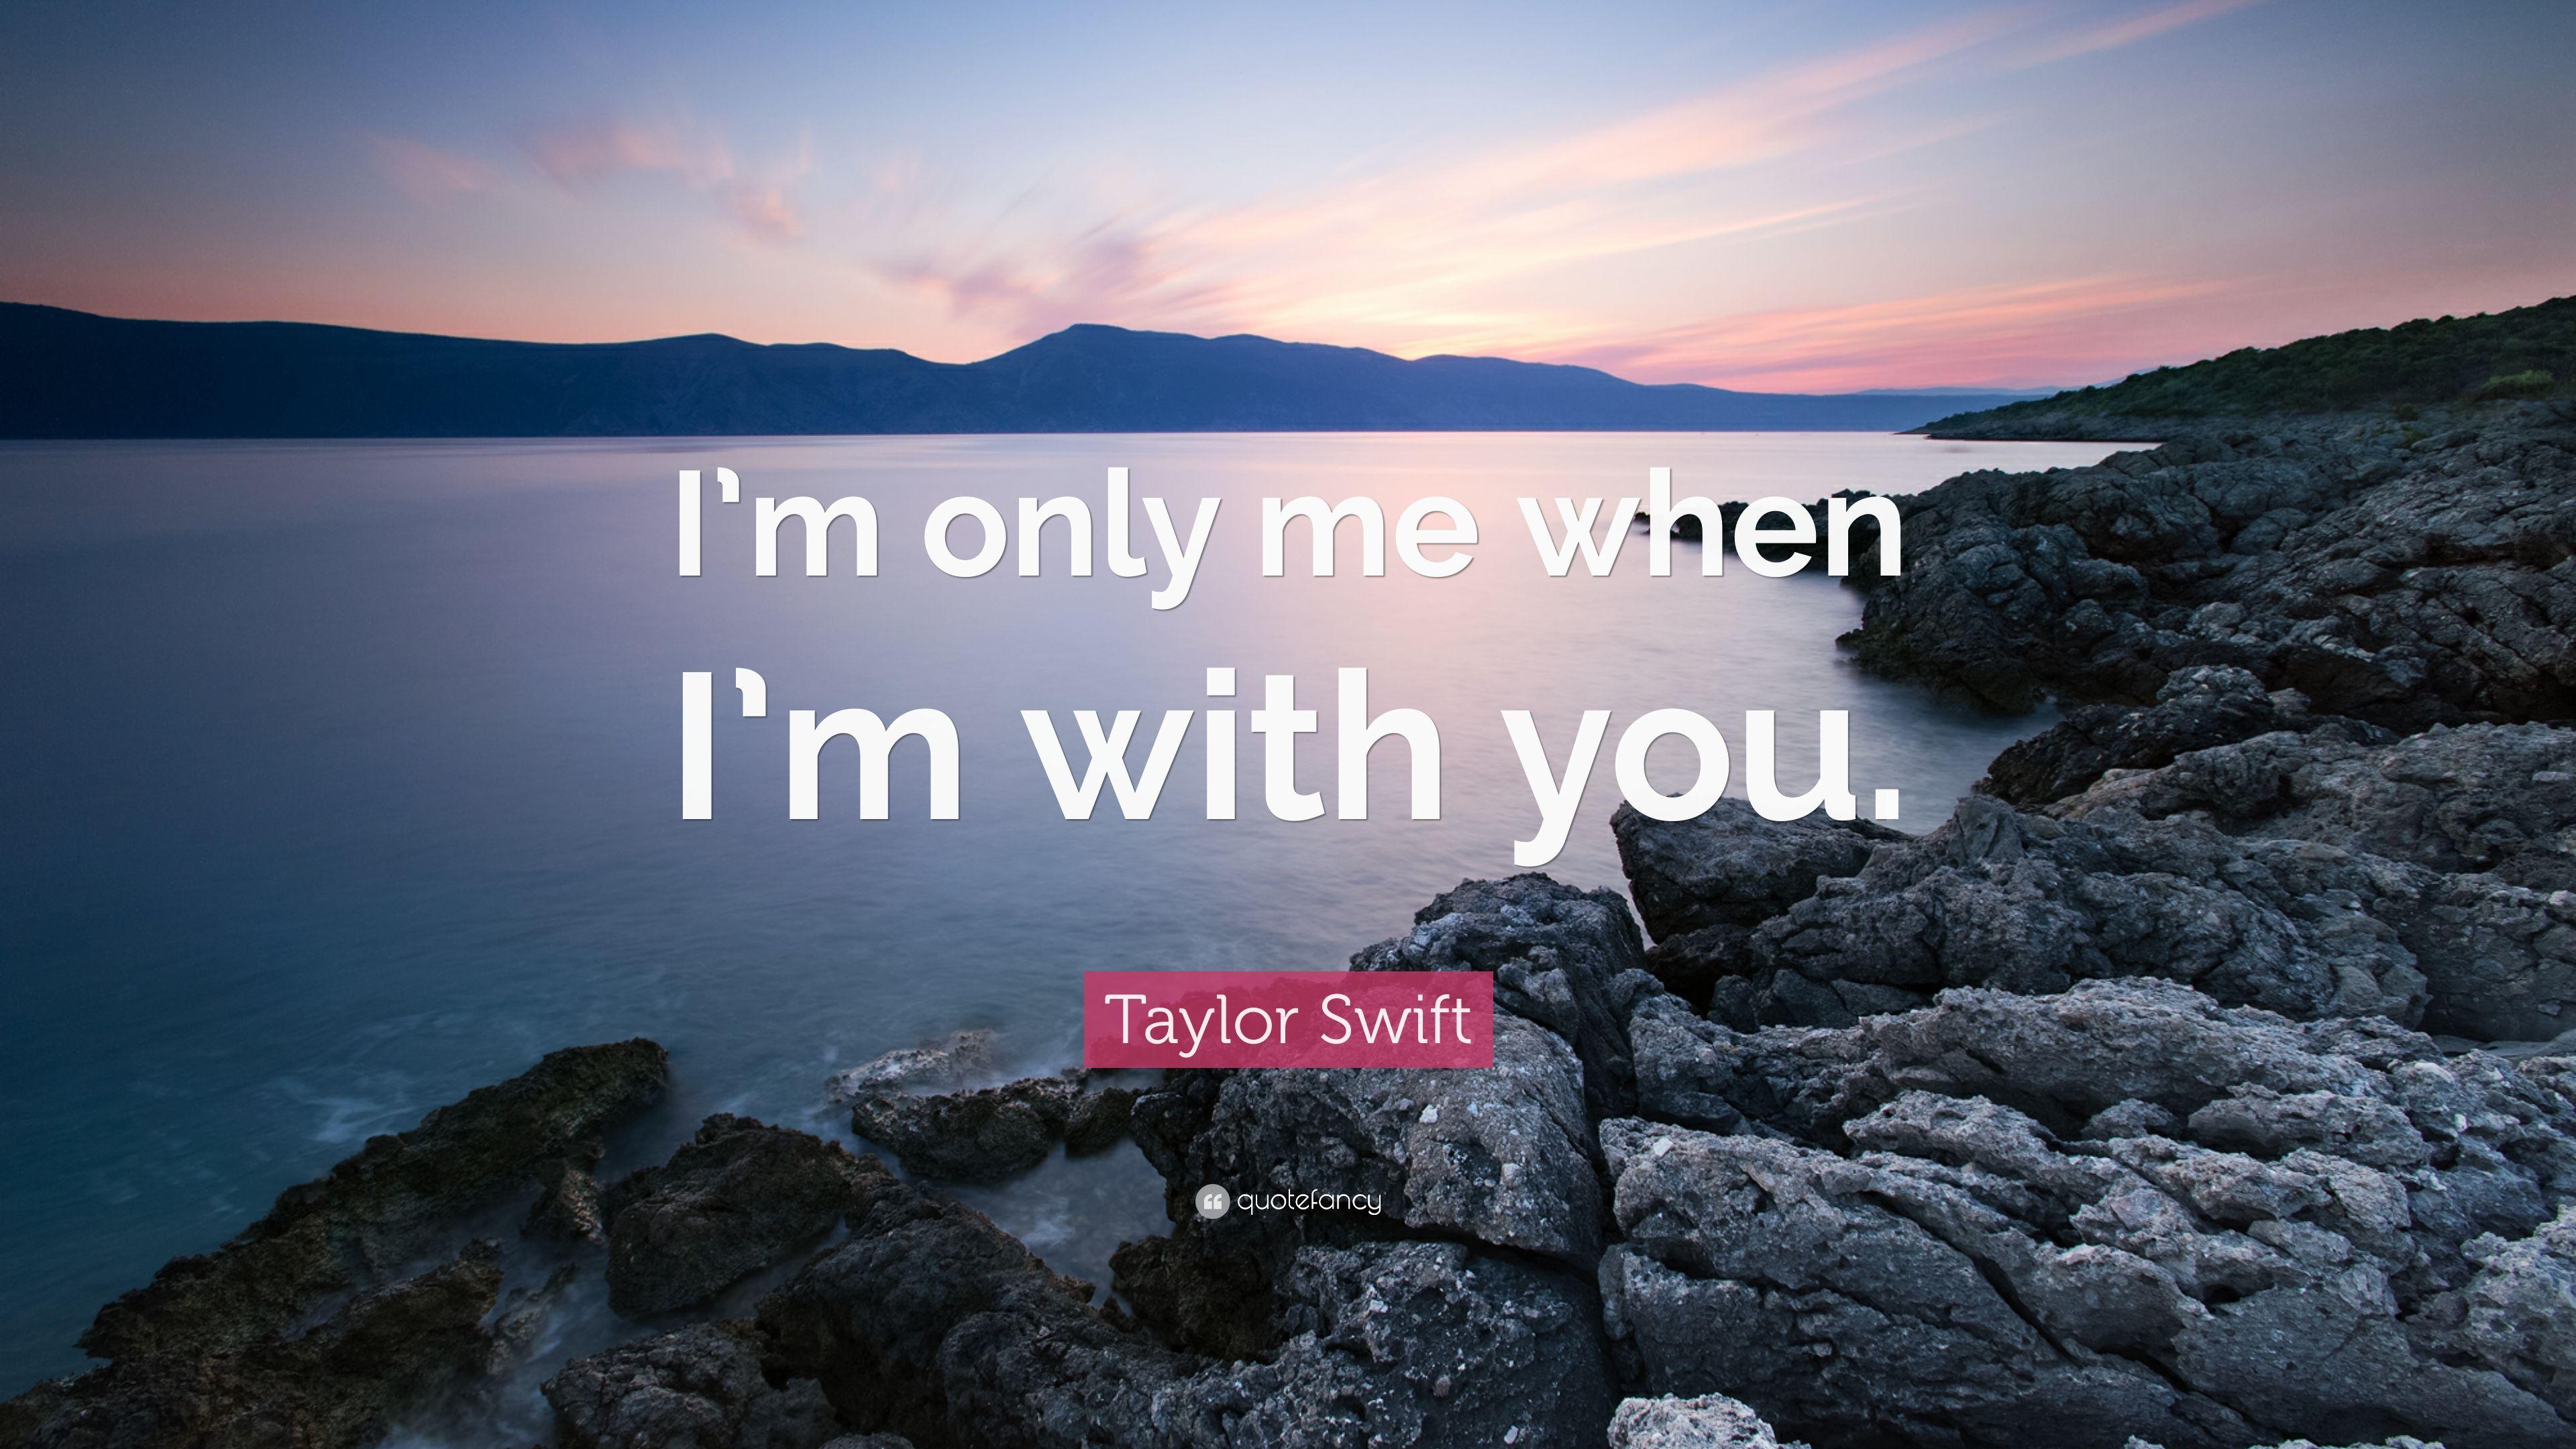 Taylor Swift Quote: “I'm only me when I'm with you.” 12 wallpaper